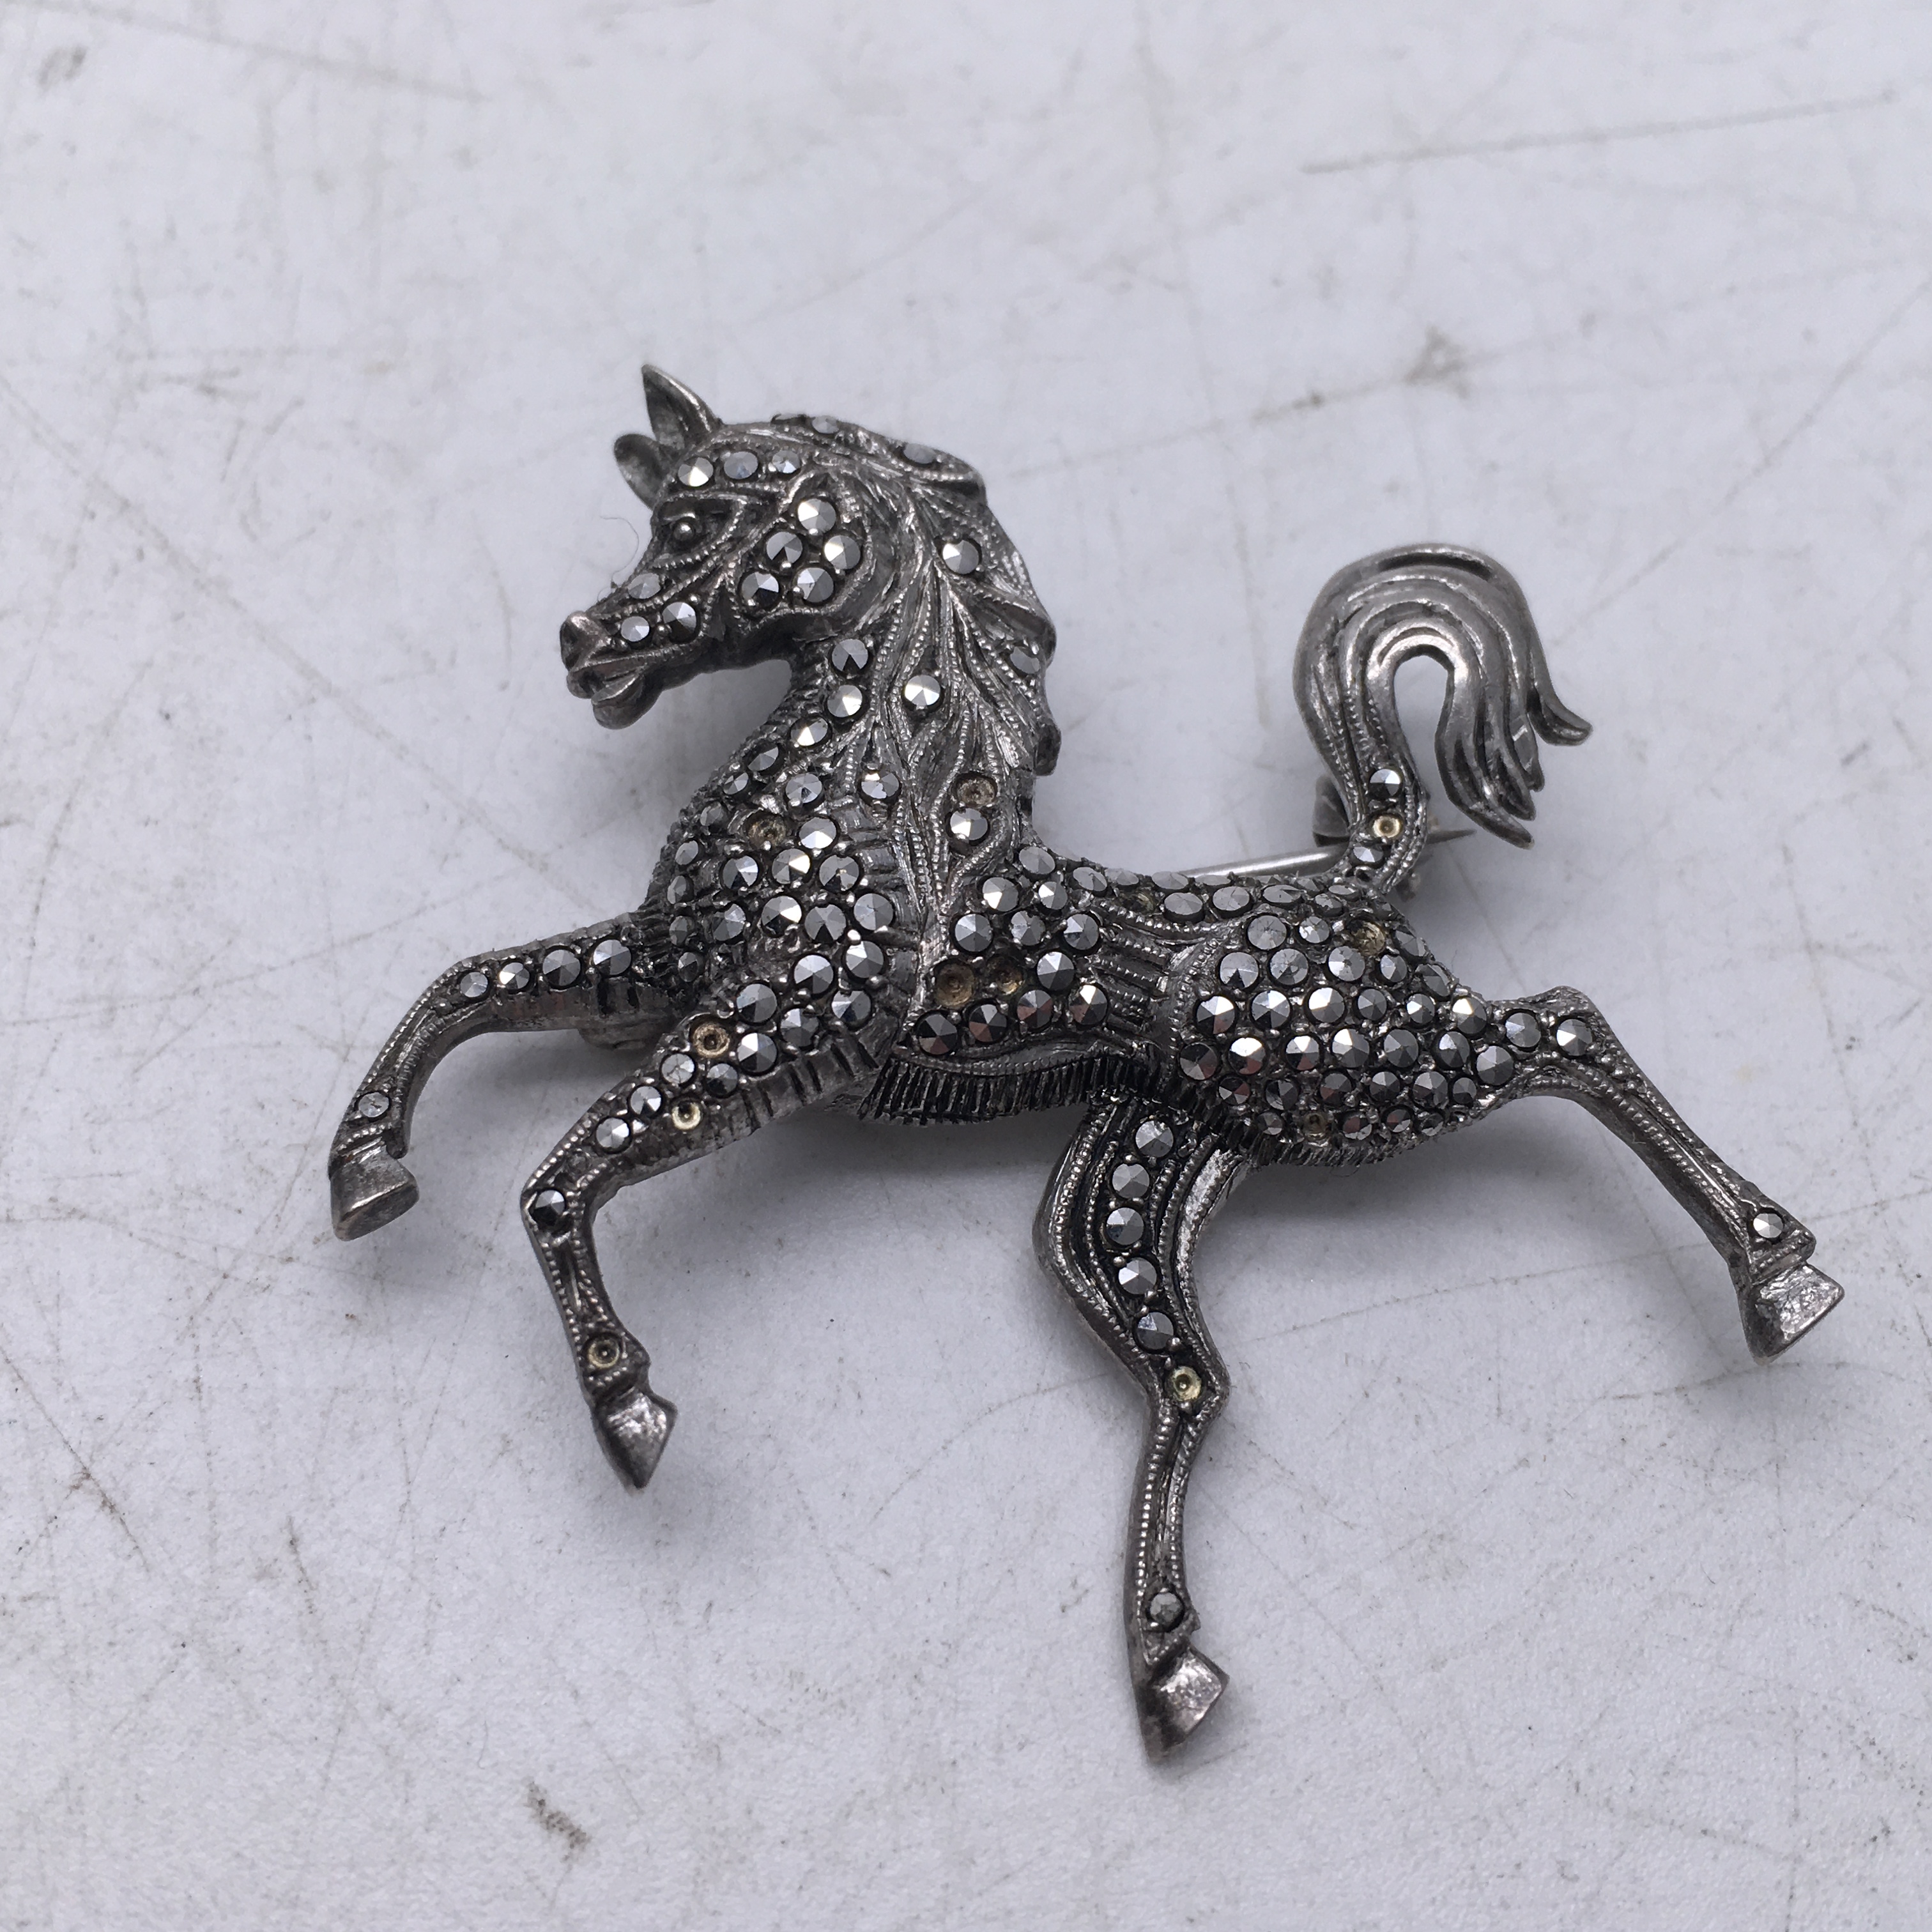 Delicate silver and marcasite brooch modelled as a stylized horse 2inches long - Image 3 of 3